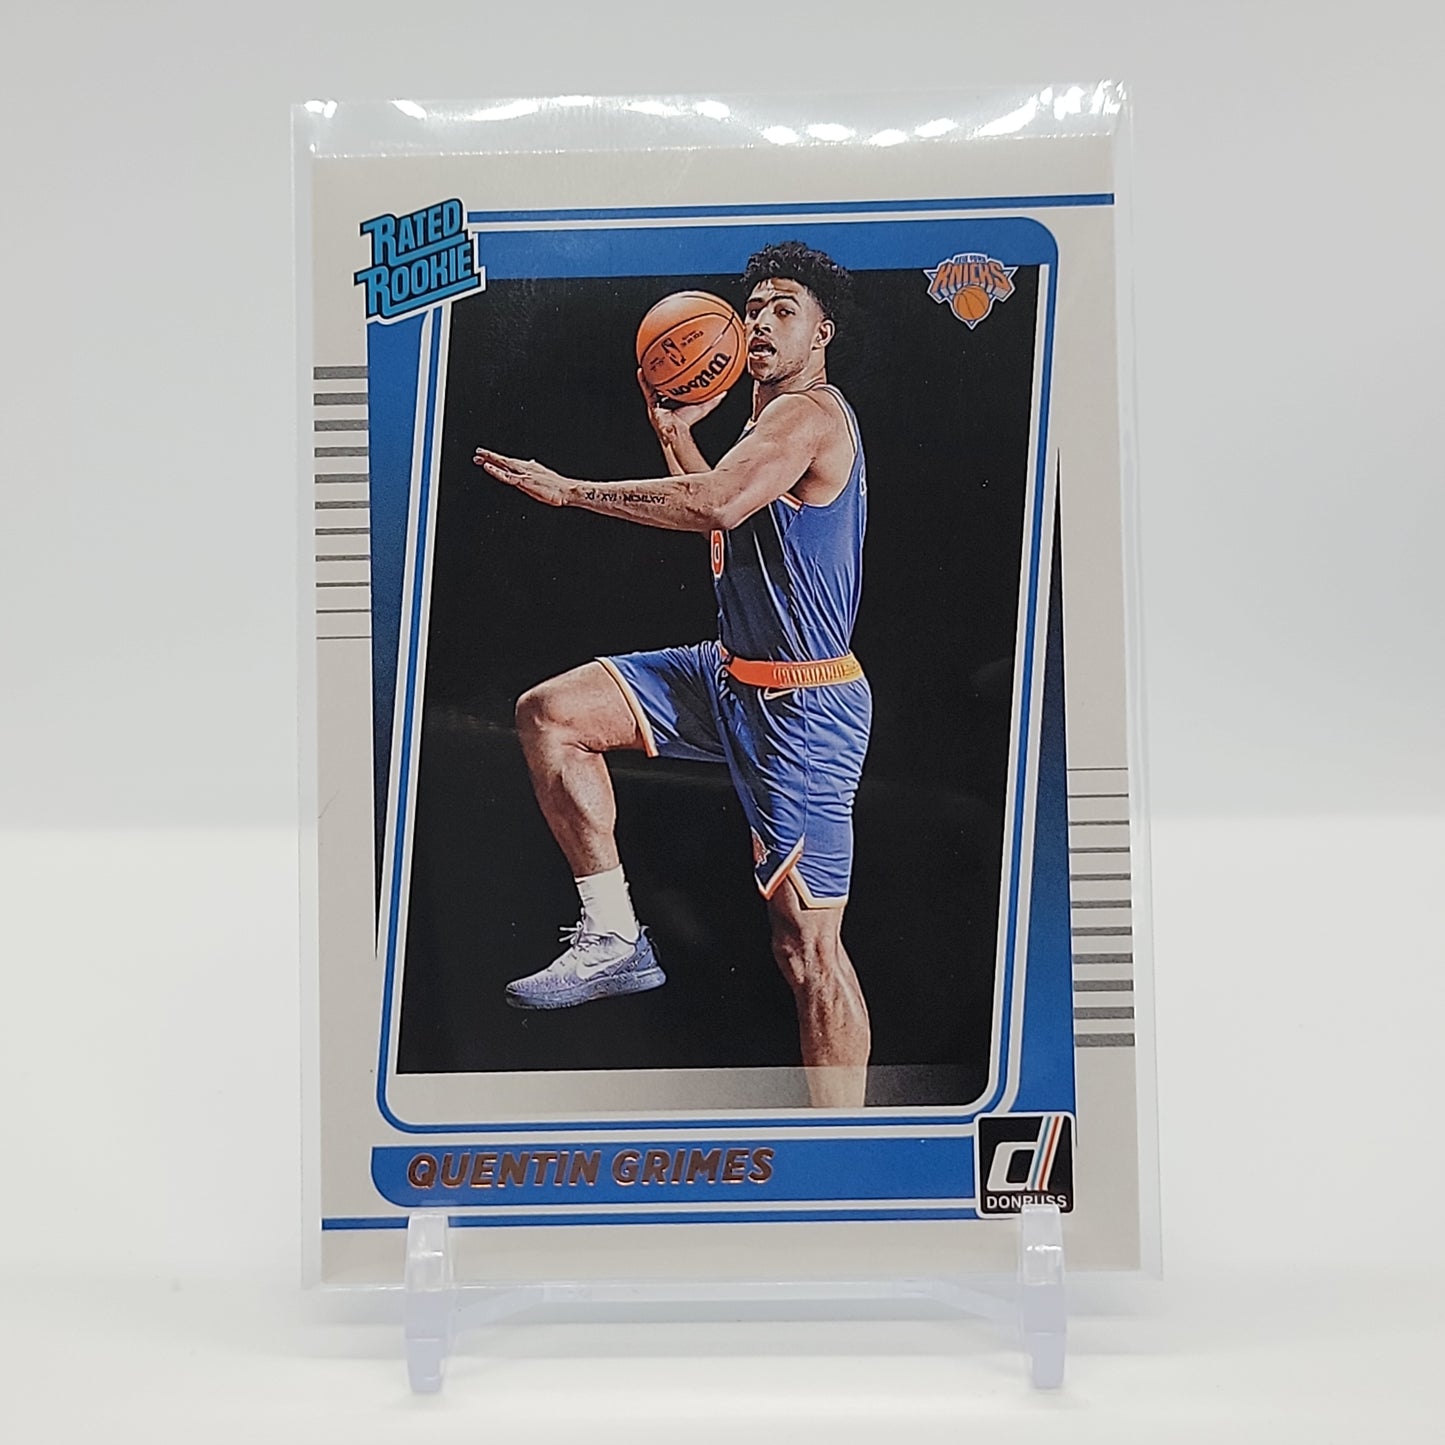 Quentin Grimes Rated Rookie Donruss 2021-22 Card No. 216